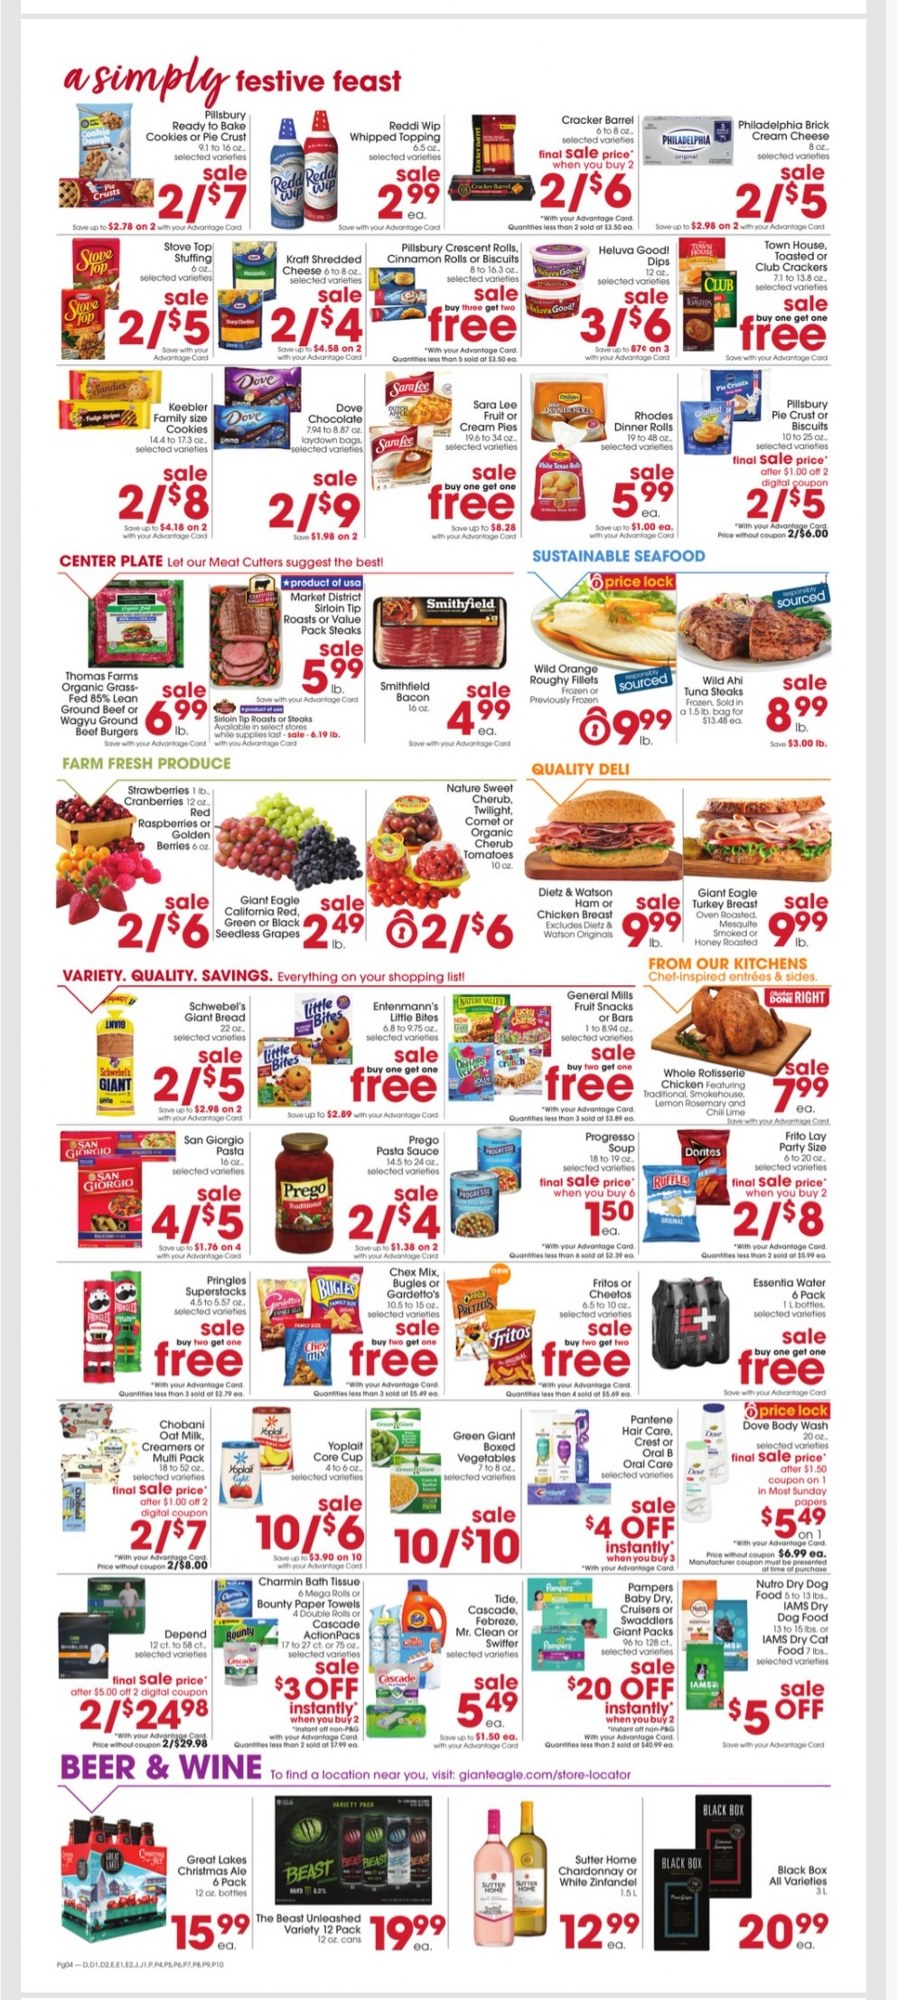 Giant Eagle Black Friday July 2024 Weekly Sales, Deals, Discounts and Digital Coupons.